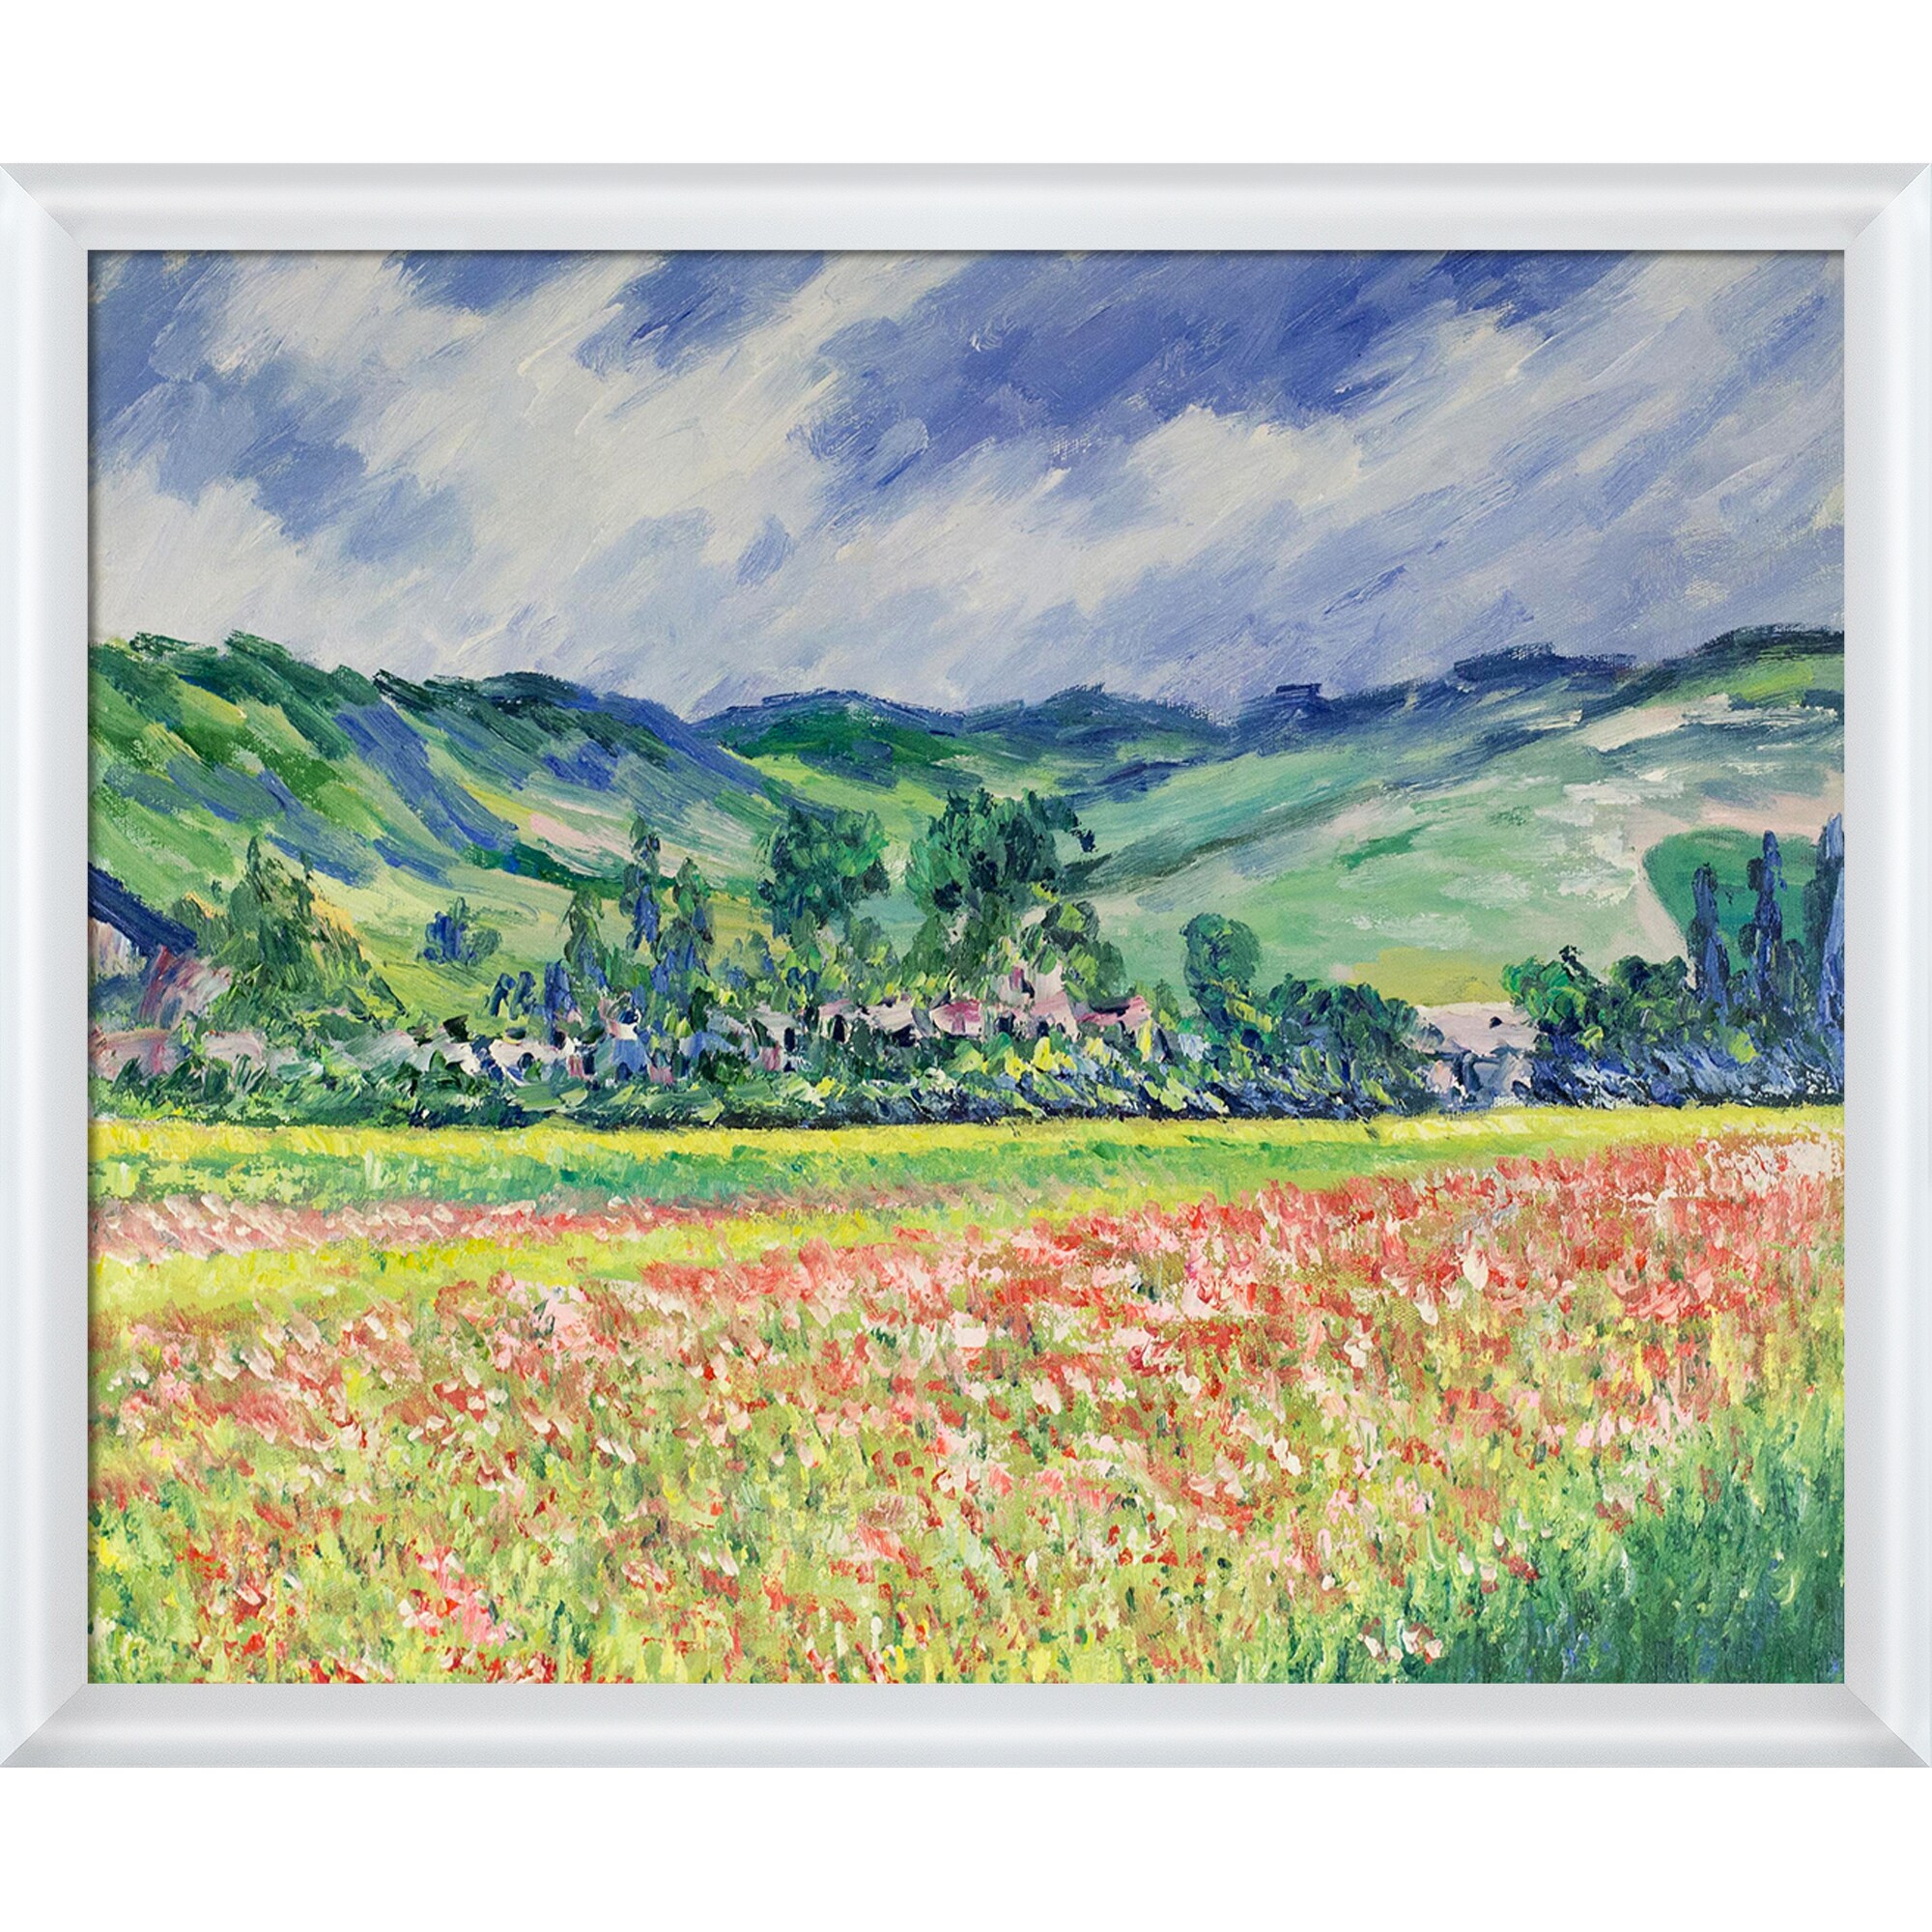 La Pastiche Framed 22.75-in H x 26.75-in W Floral Painting on Canvas in ...